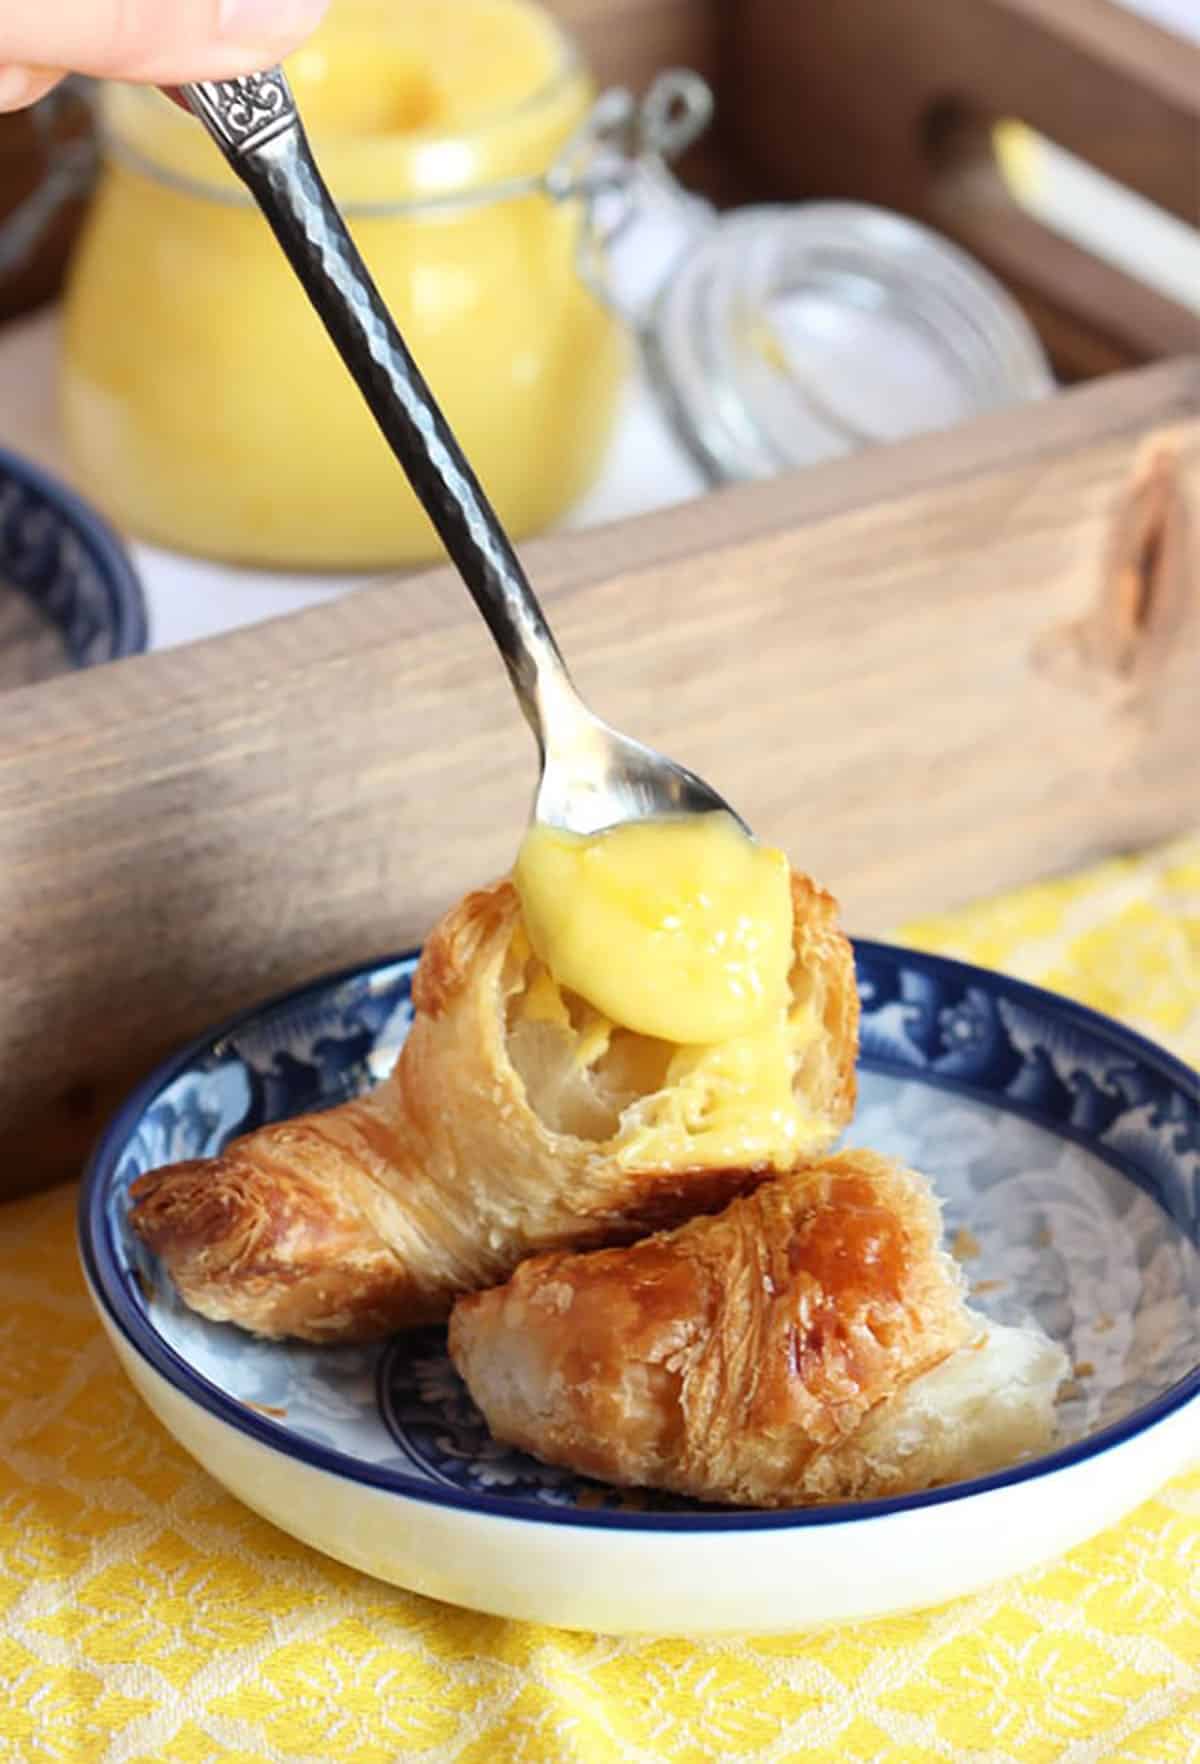 Lemon Curd being spread on a croissant.